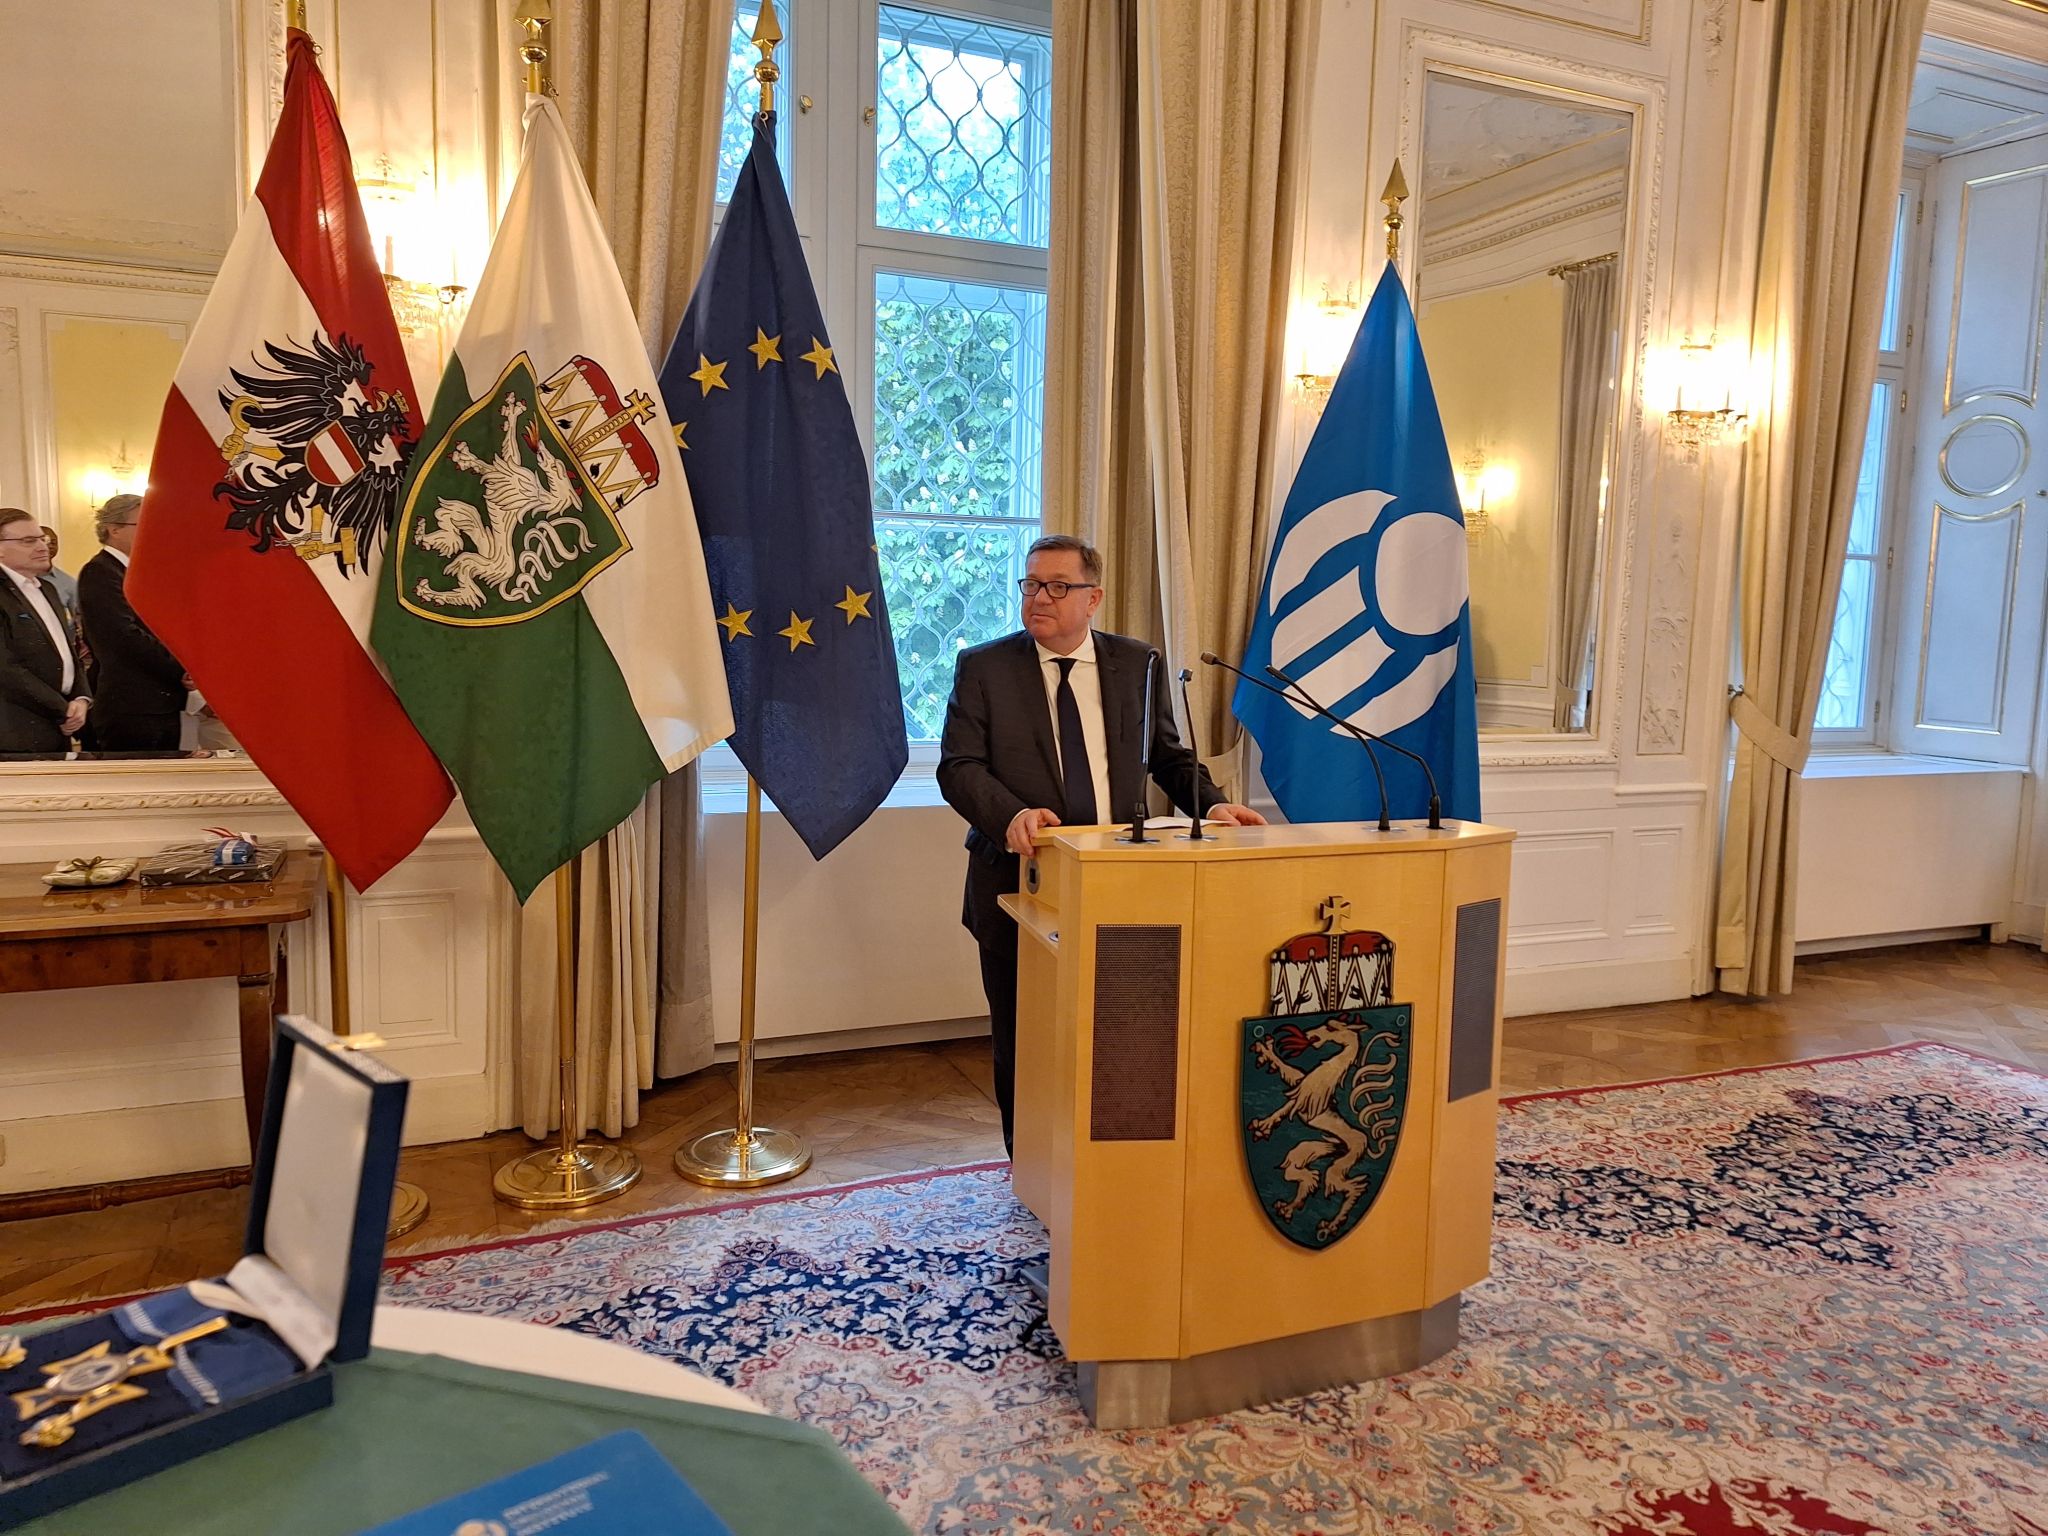 Former IOI Secretary General, Minister Werner Amon, addressing guests upon receiving the Golden Order of Merit.